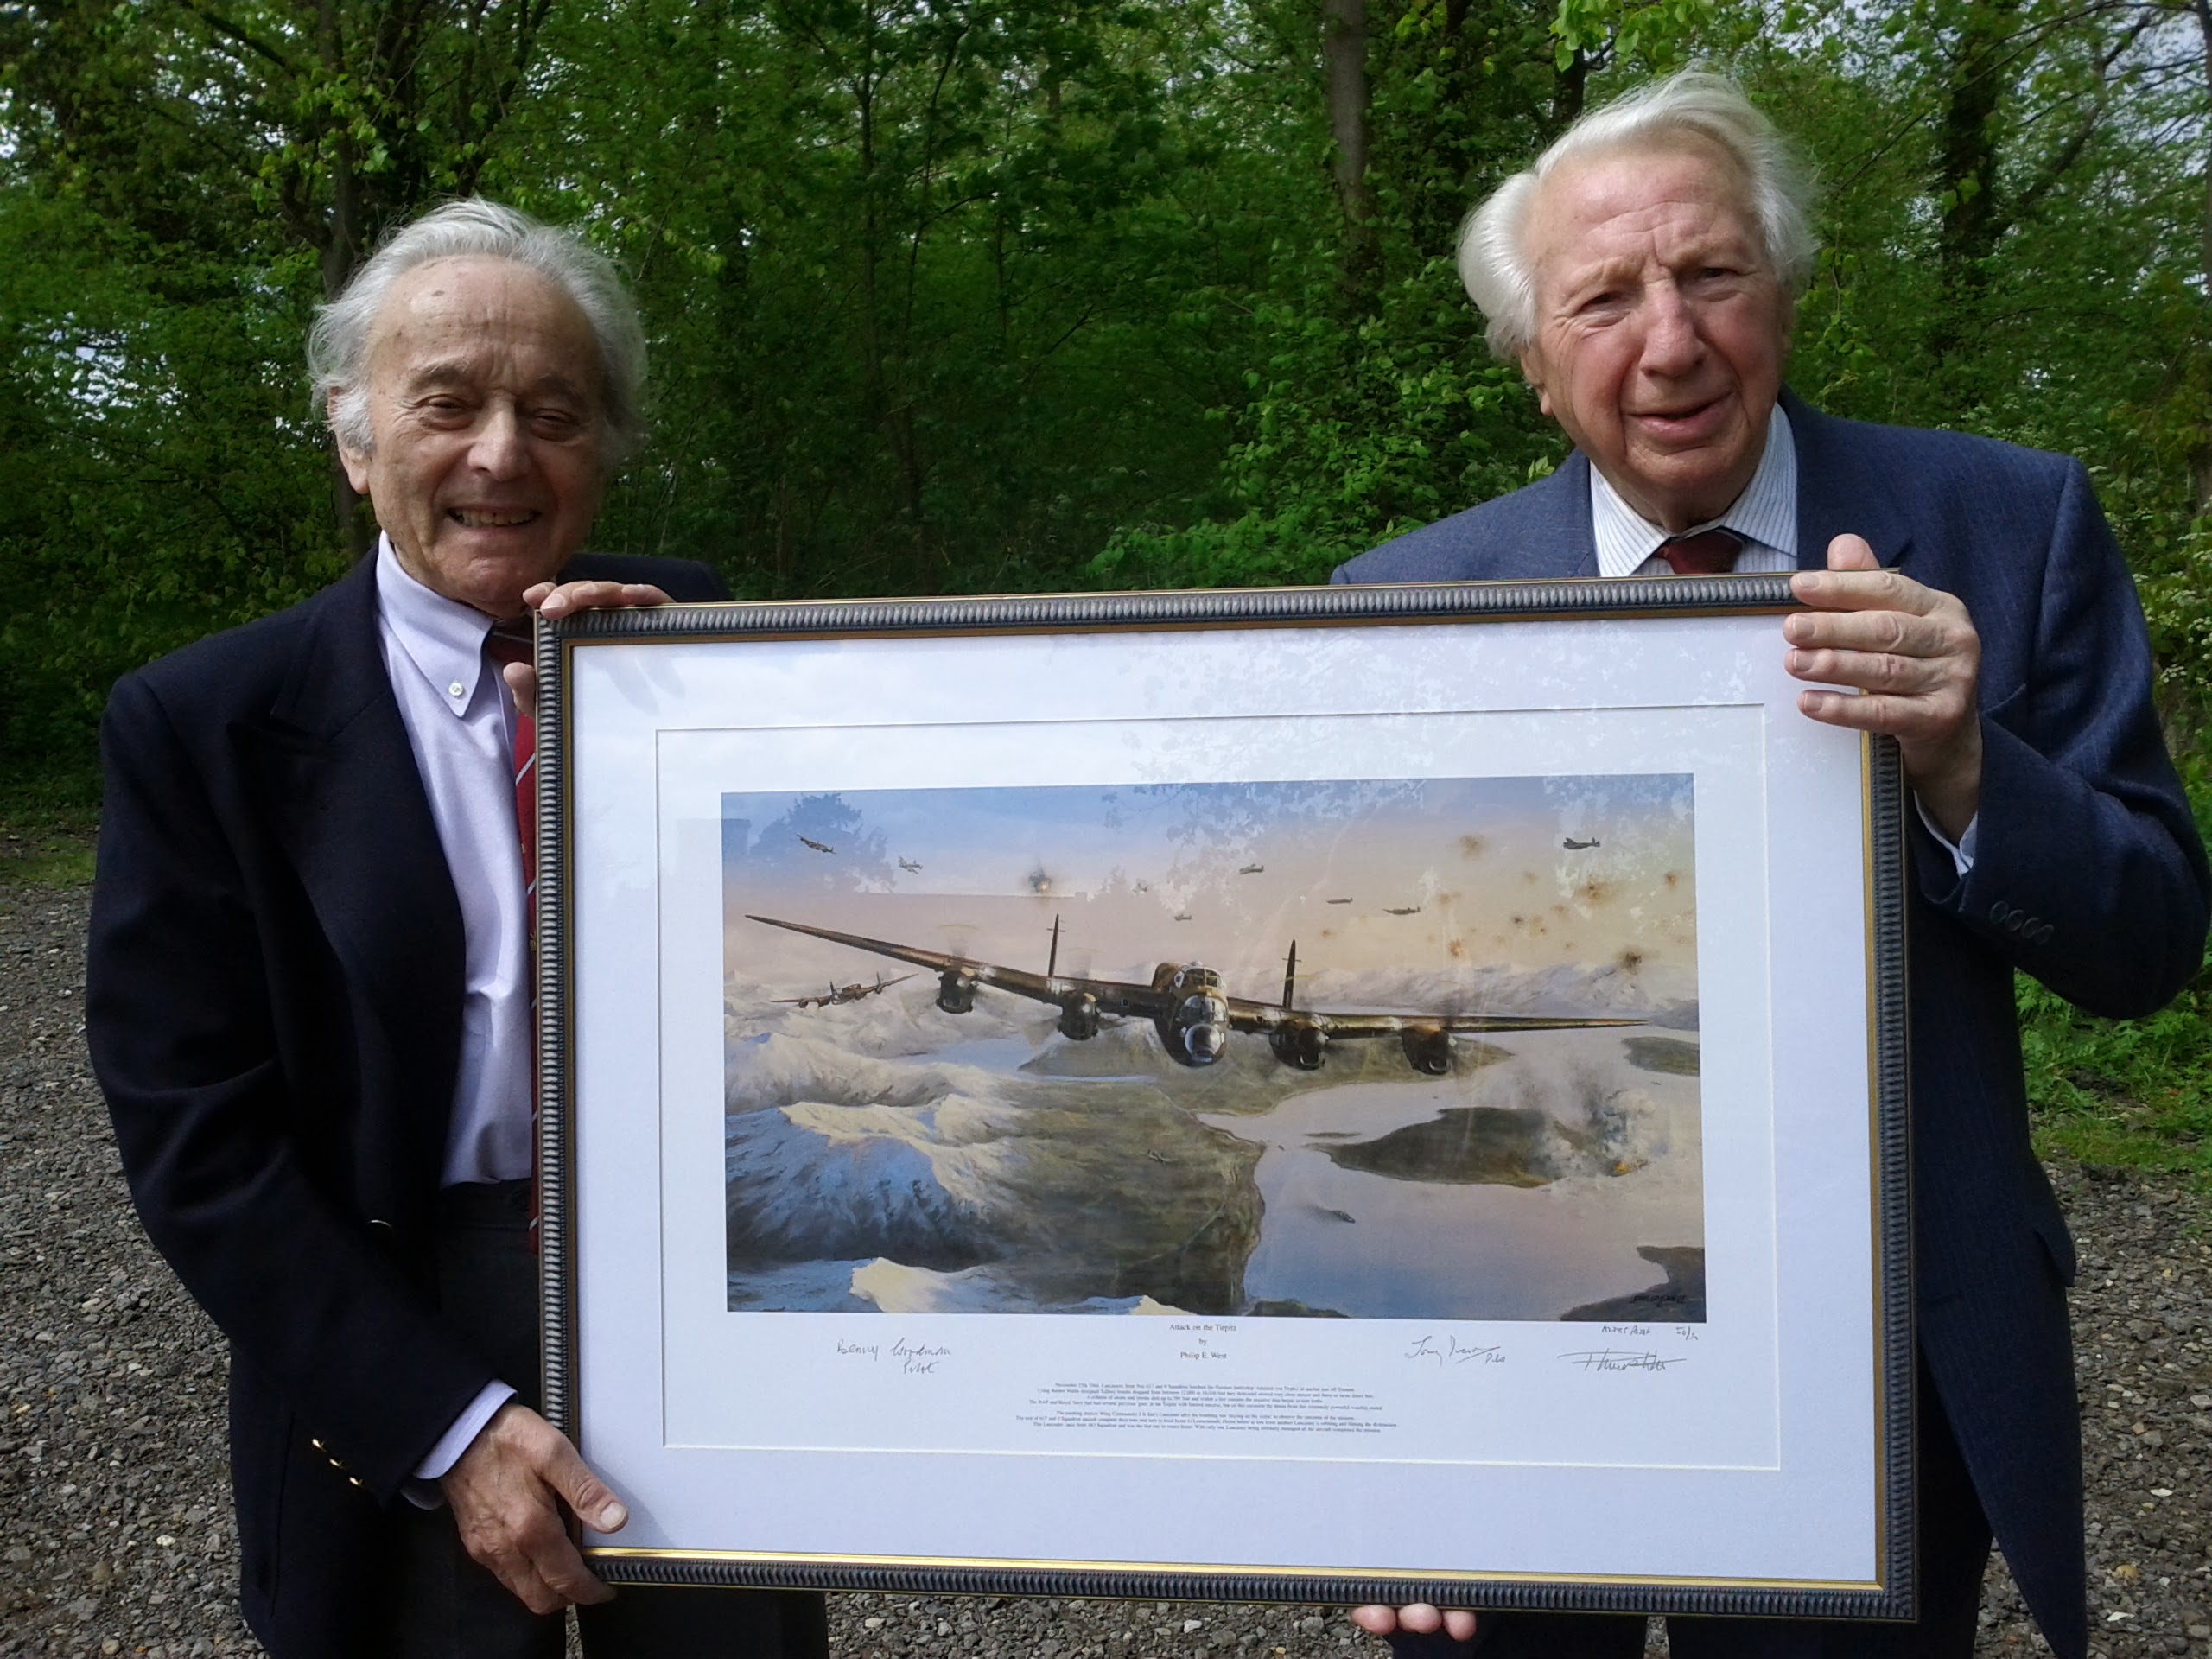 Benny and friend hold a framed picture of a Lancaster between them.